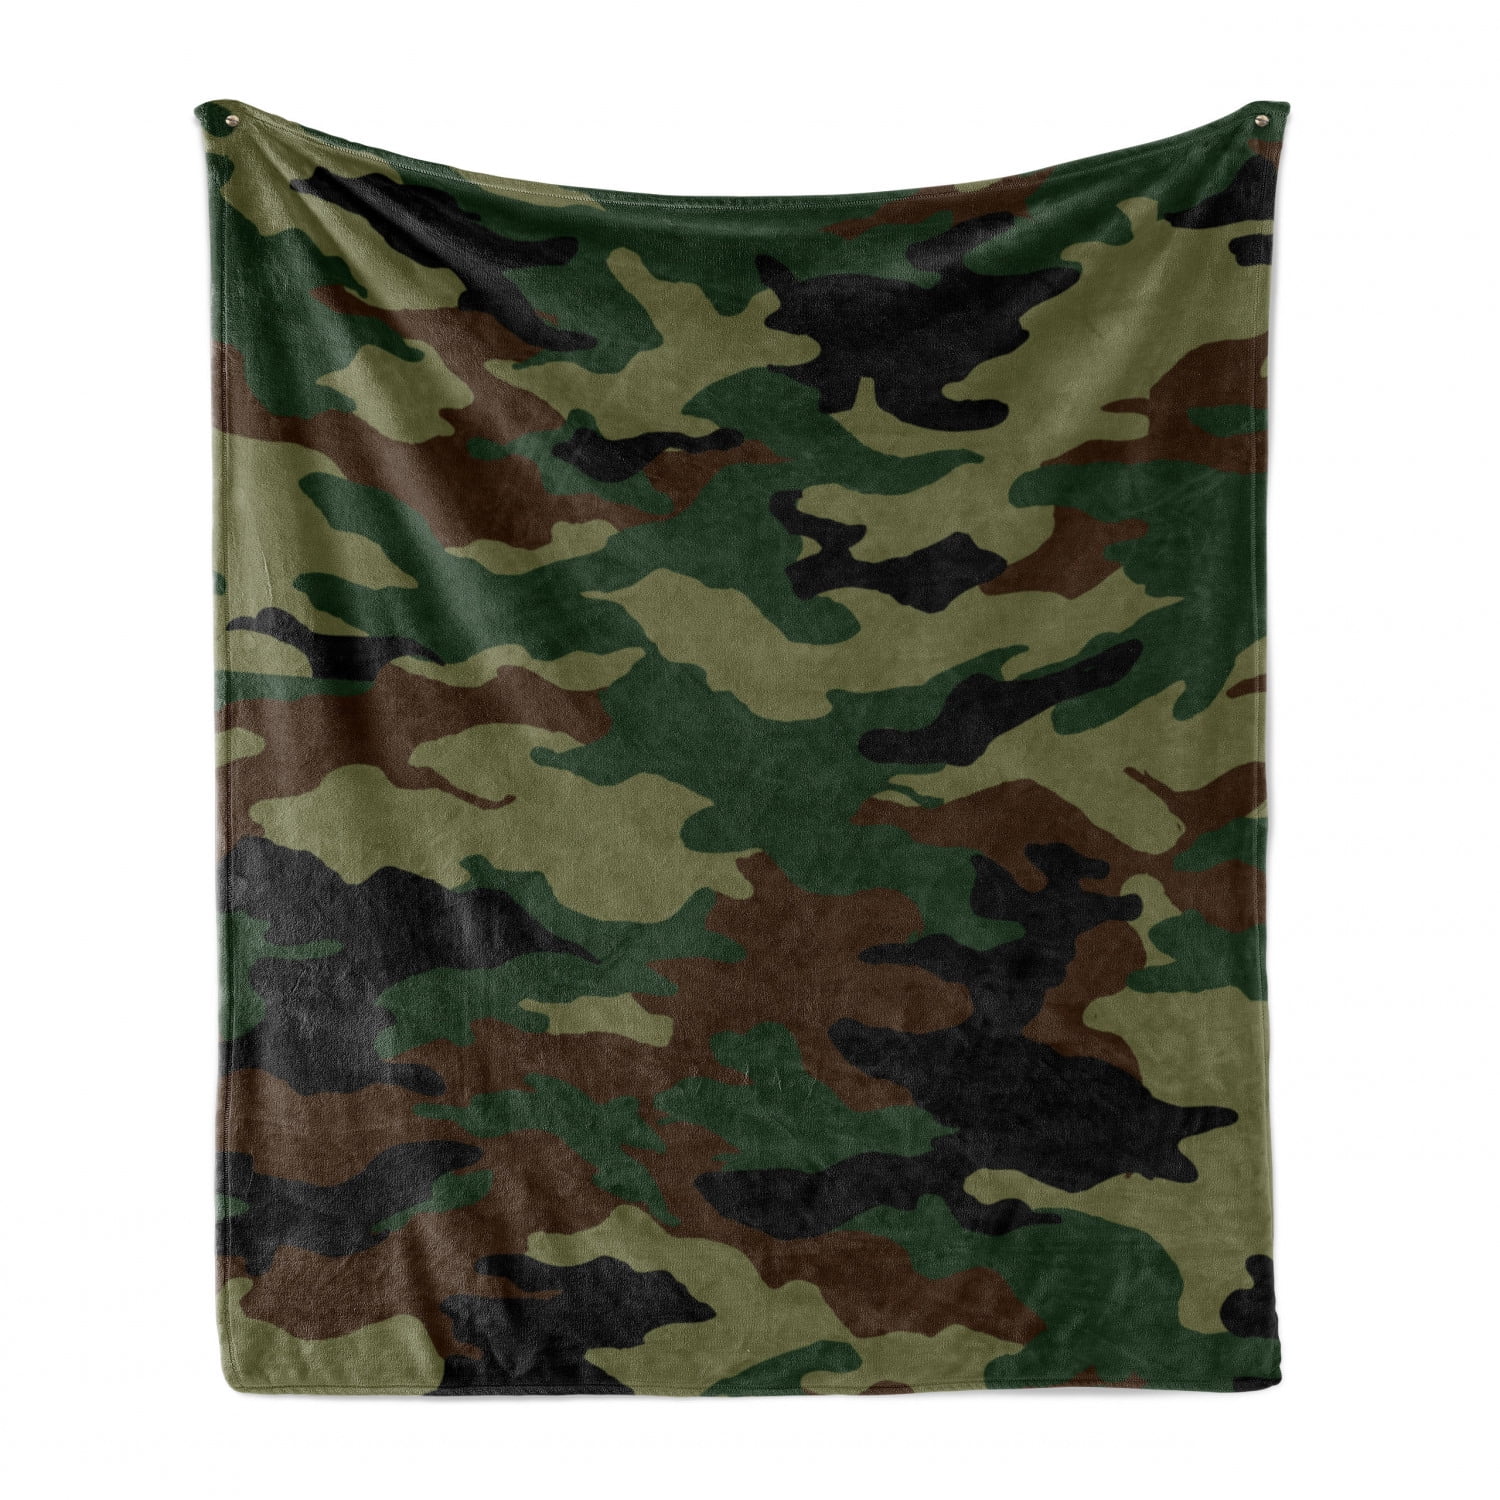 Your Choice of 3 Camo Colors! Camoflauge Throw Blanket Luxury Sherpa 50" x 70" 